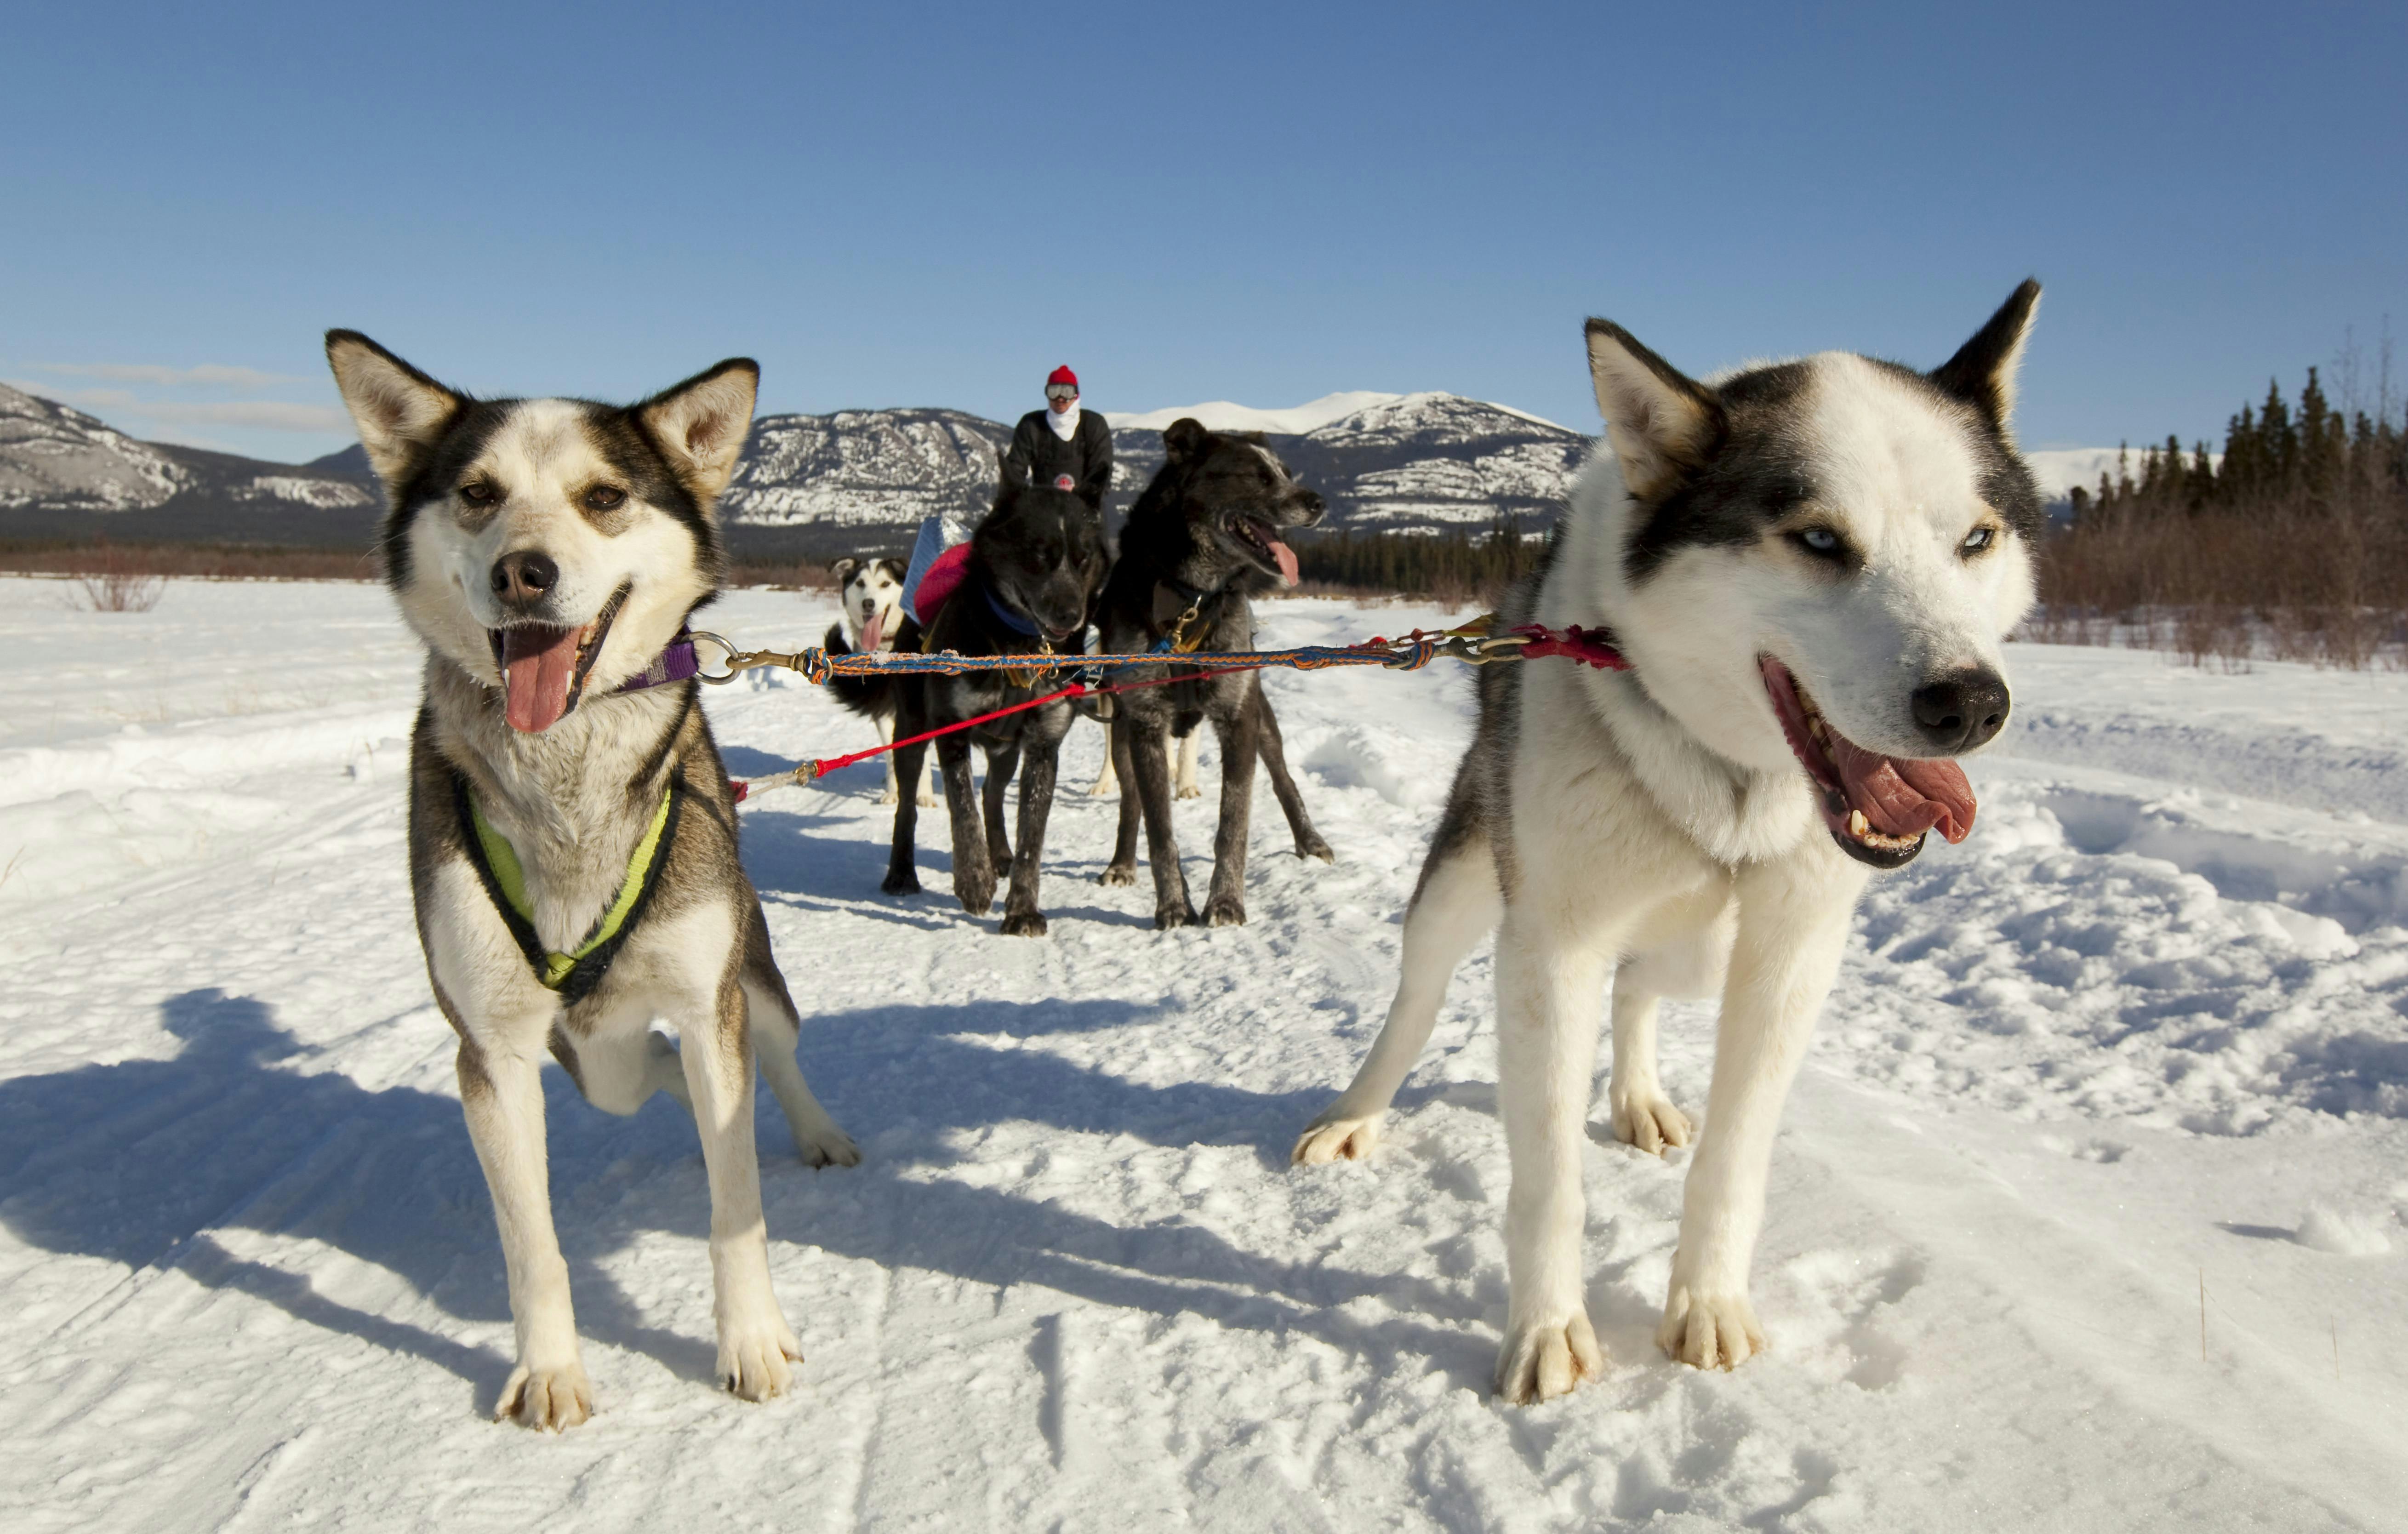 Two husky-like dogs lead a dog sled in a snowy landscape